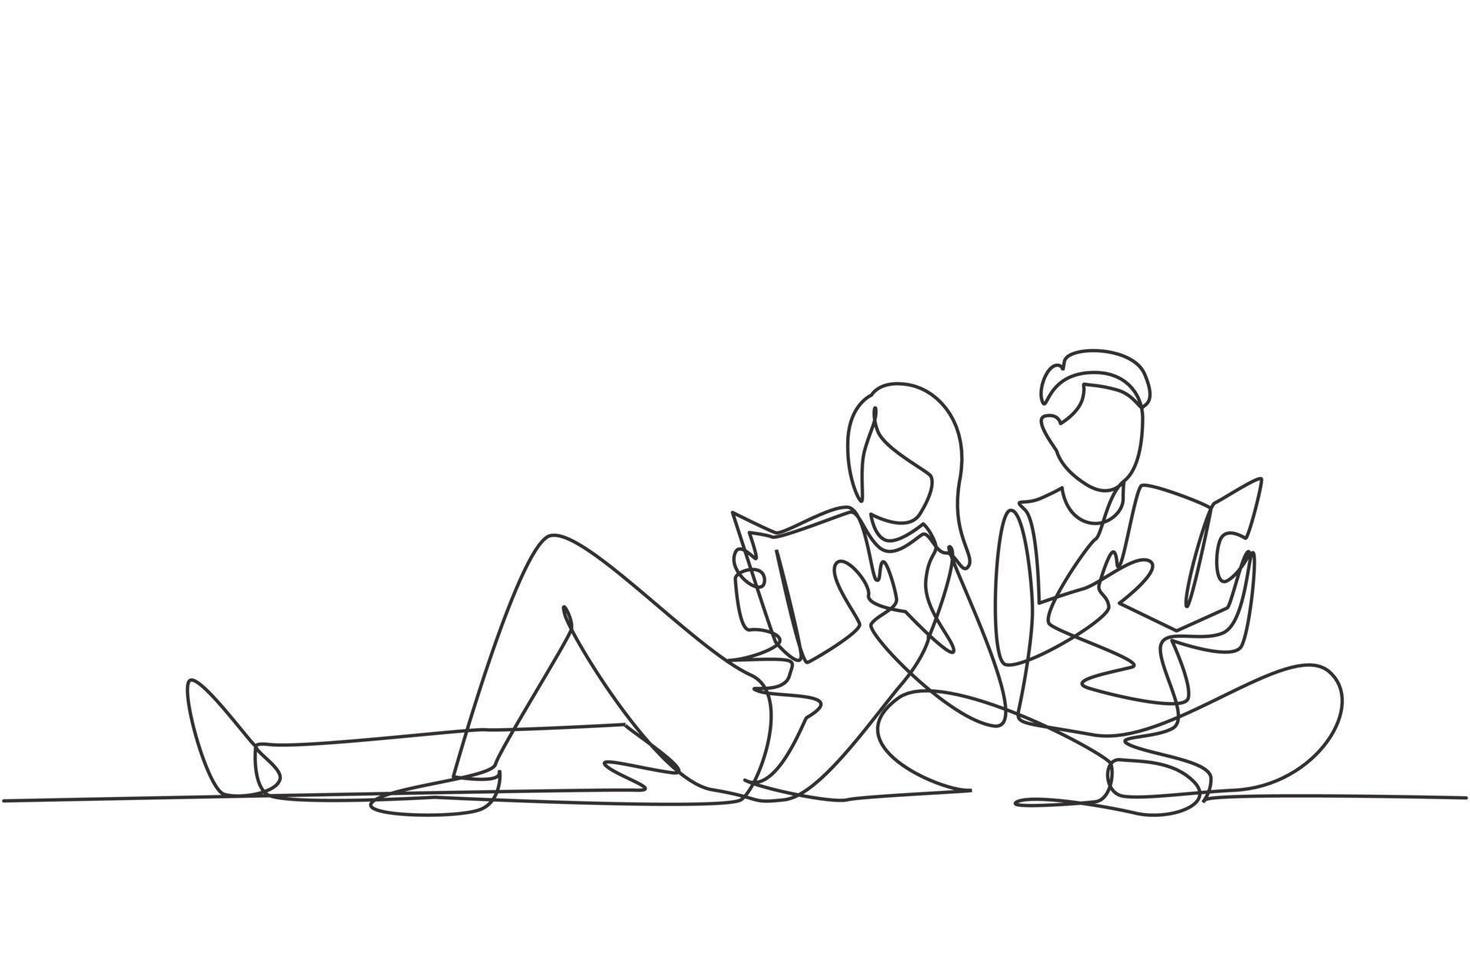 Continuous one line drawing students woman and man reading together, learning and sitting at park. Literature fans or lovers, education concept. Single line draw design vector graphic illustration